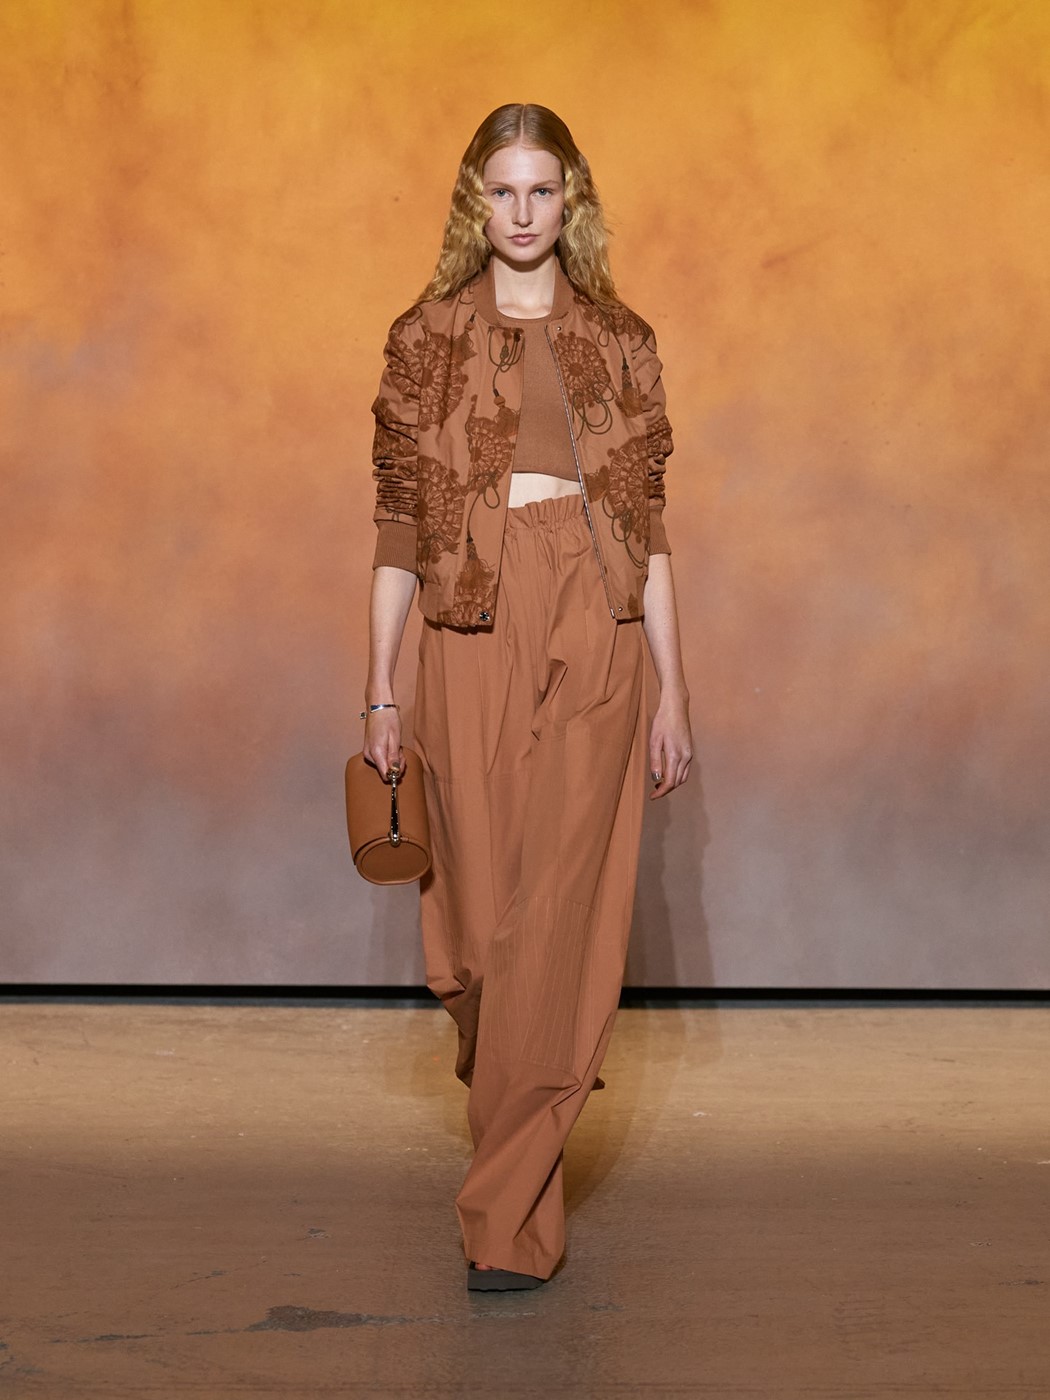 Hermès Spring/Summer 2022 collection includes the Colormatic series!